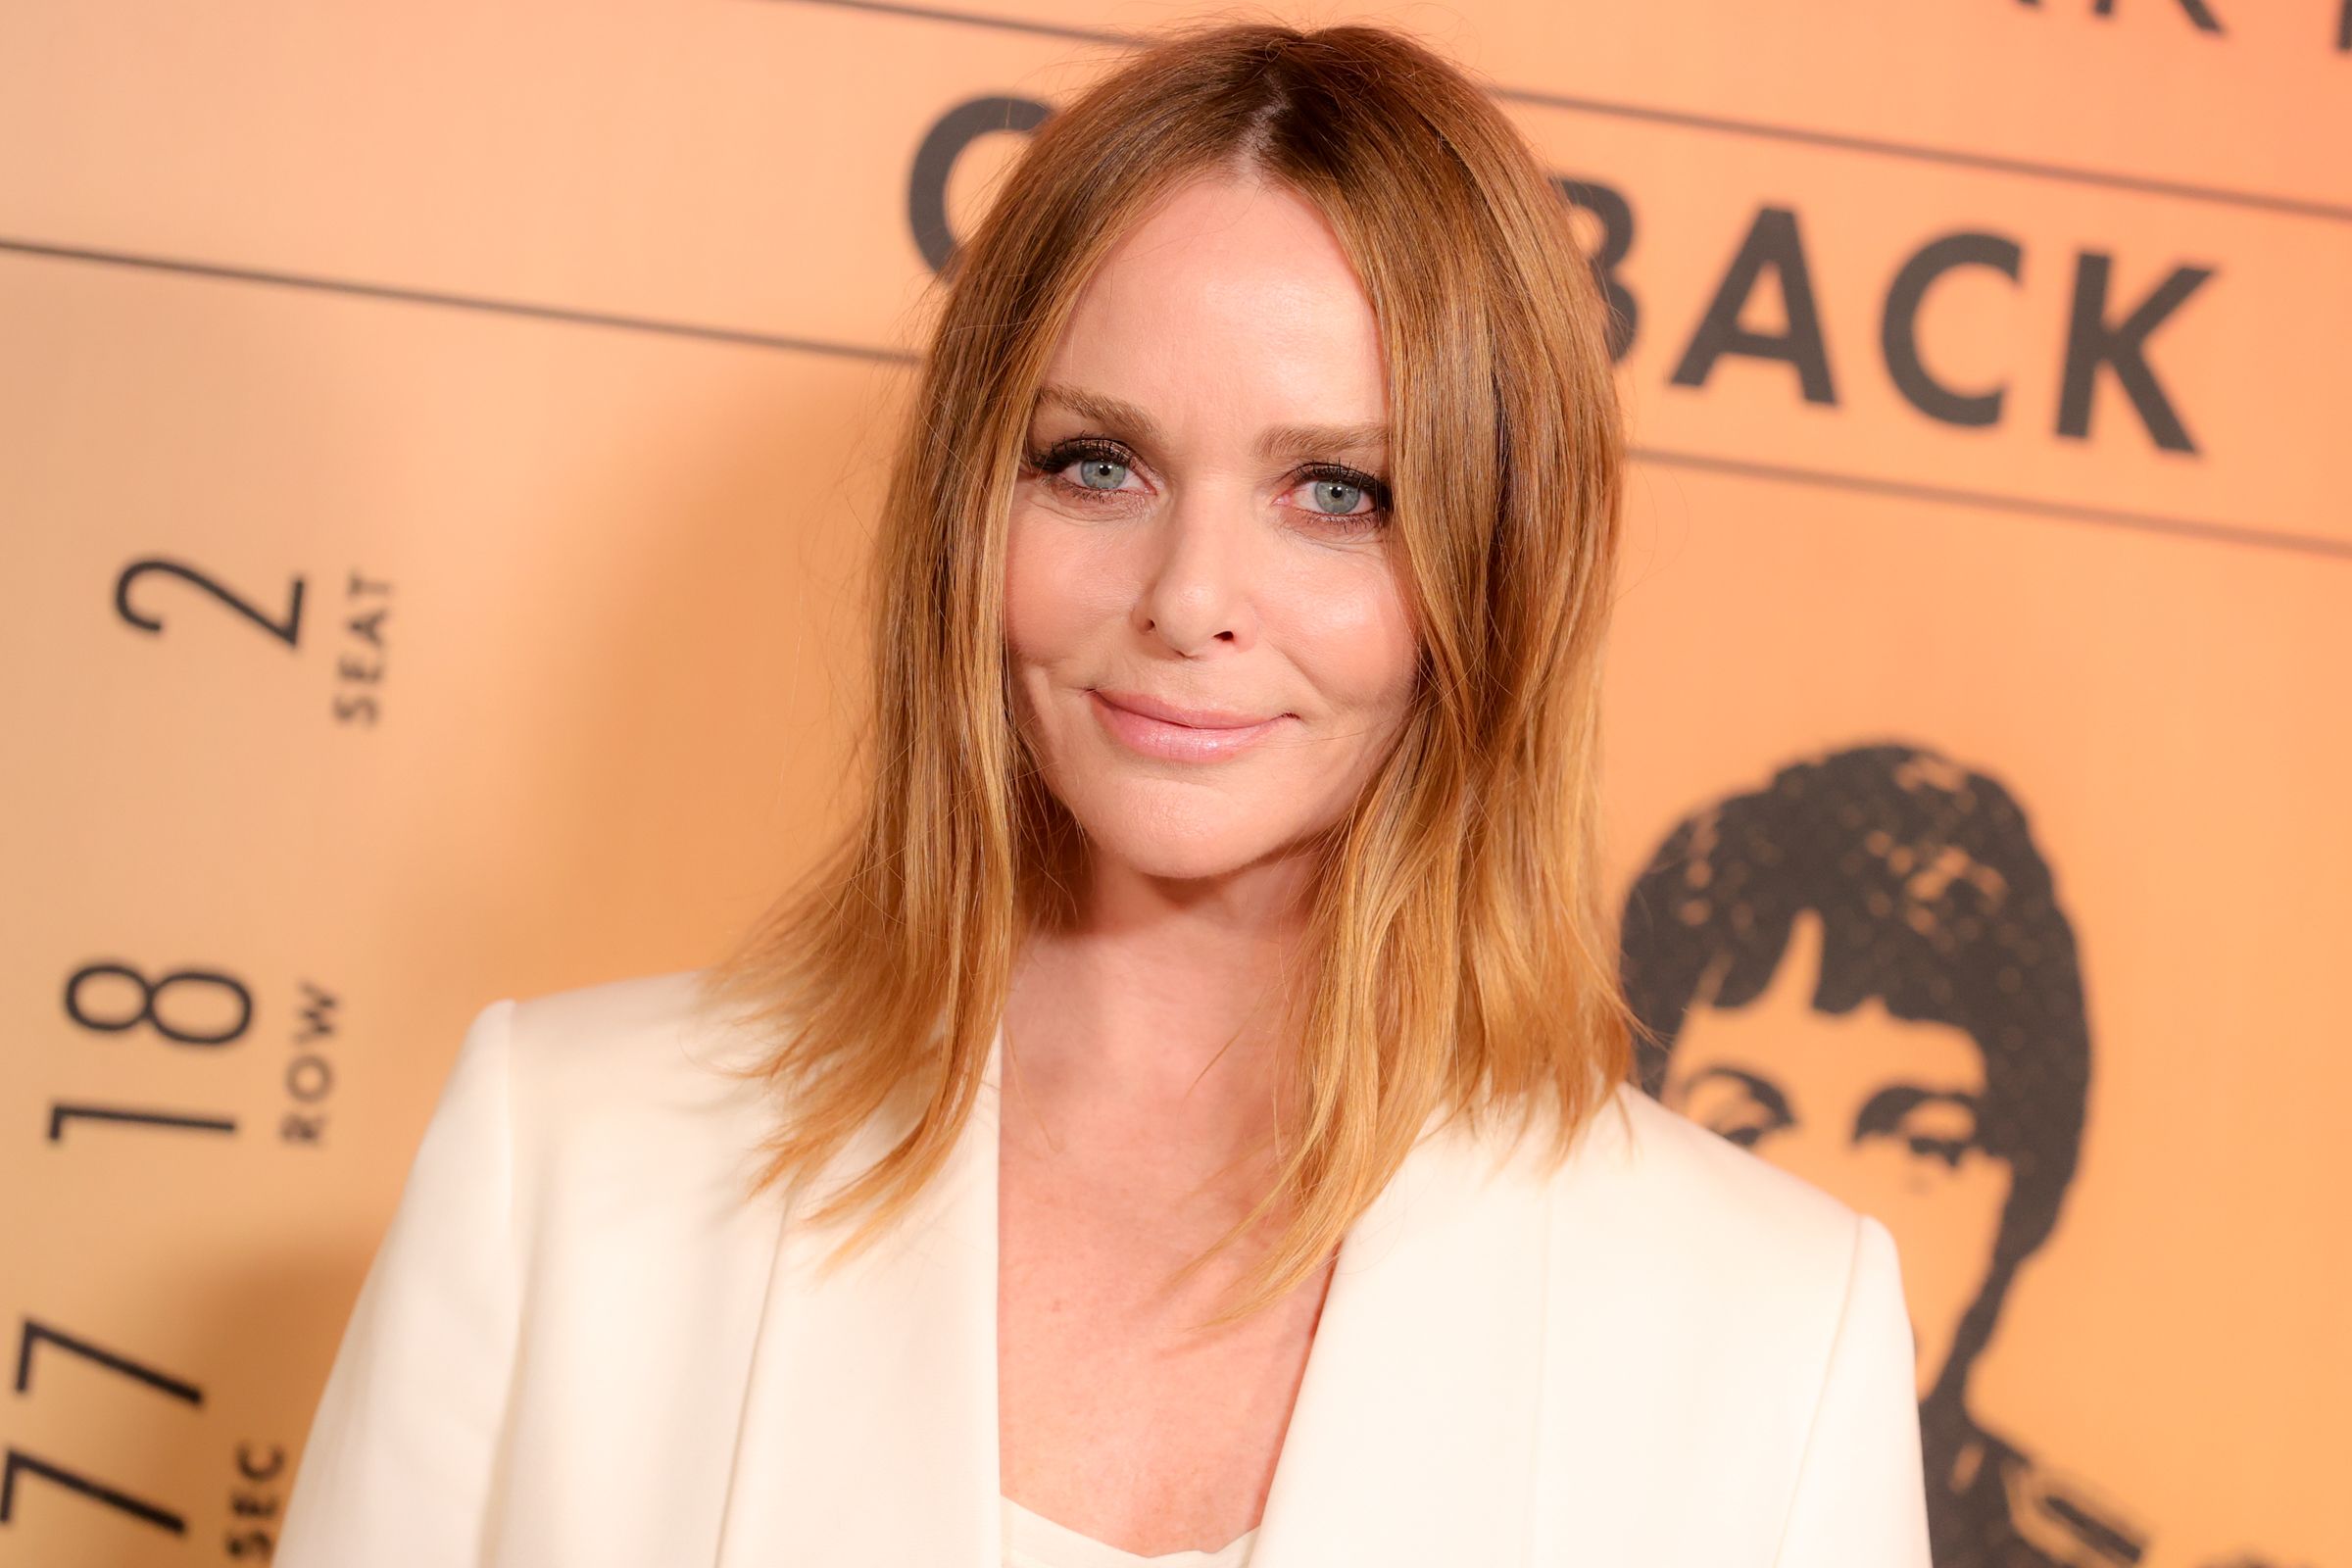 Stella McCartney: The Ethical and Sustainable Fashion Brand